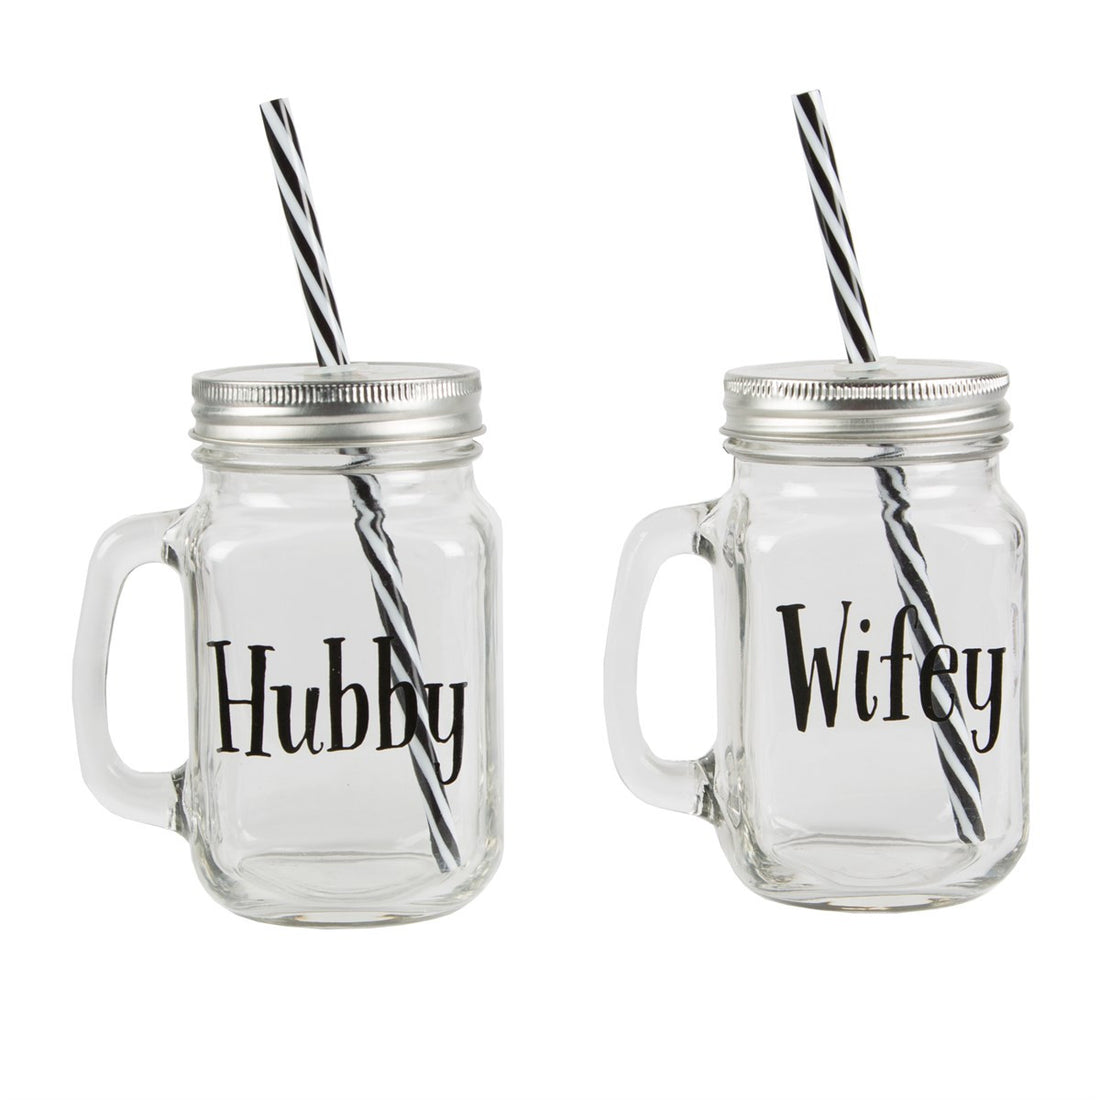 rjb-stone-set-of-2-hubby-and-wifey-mason-drinking-jars-assorted-01